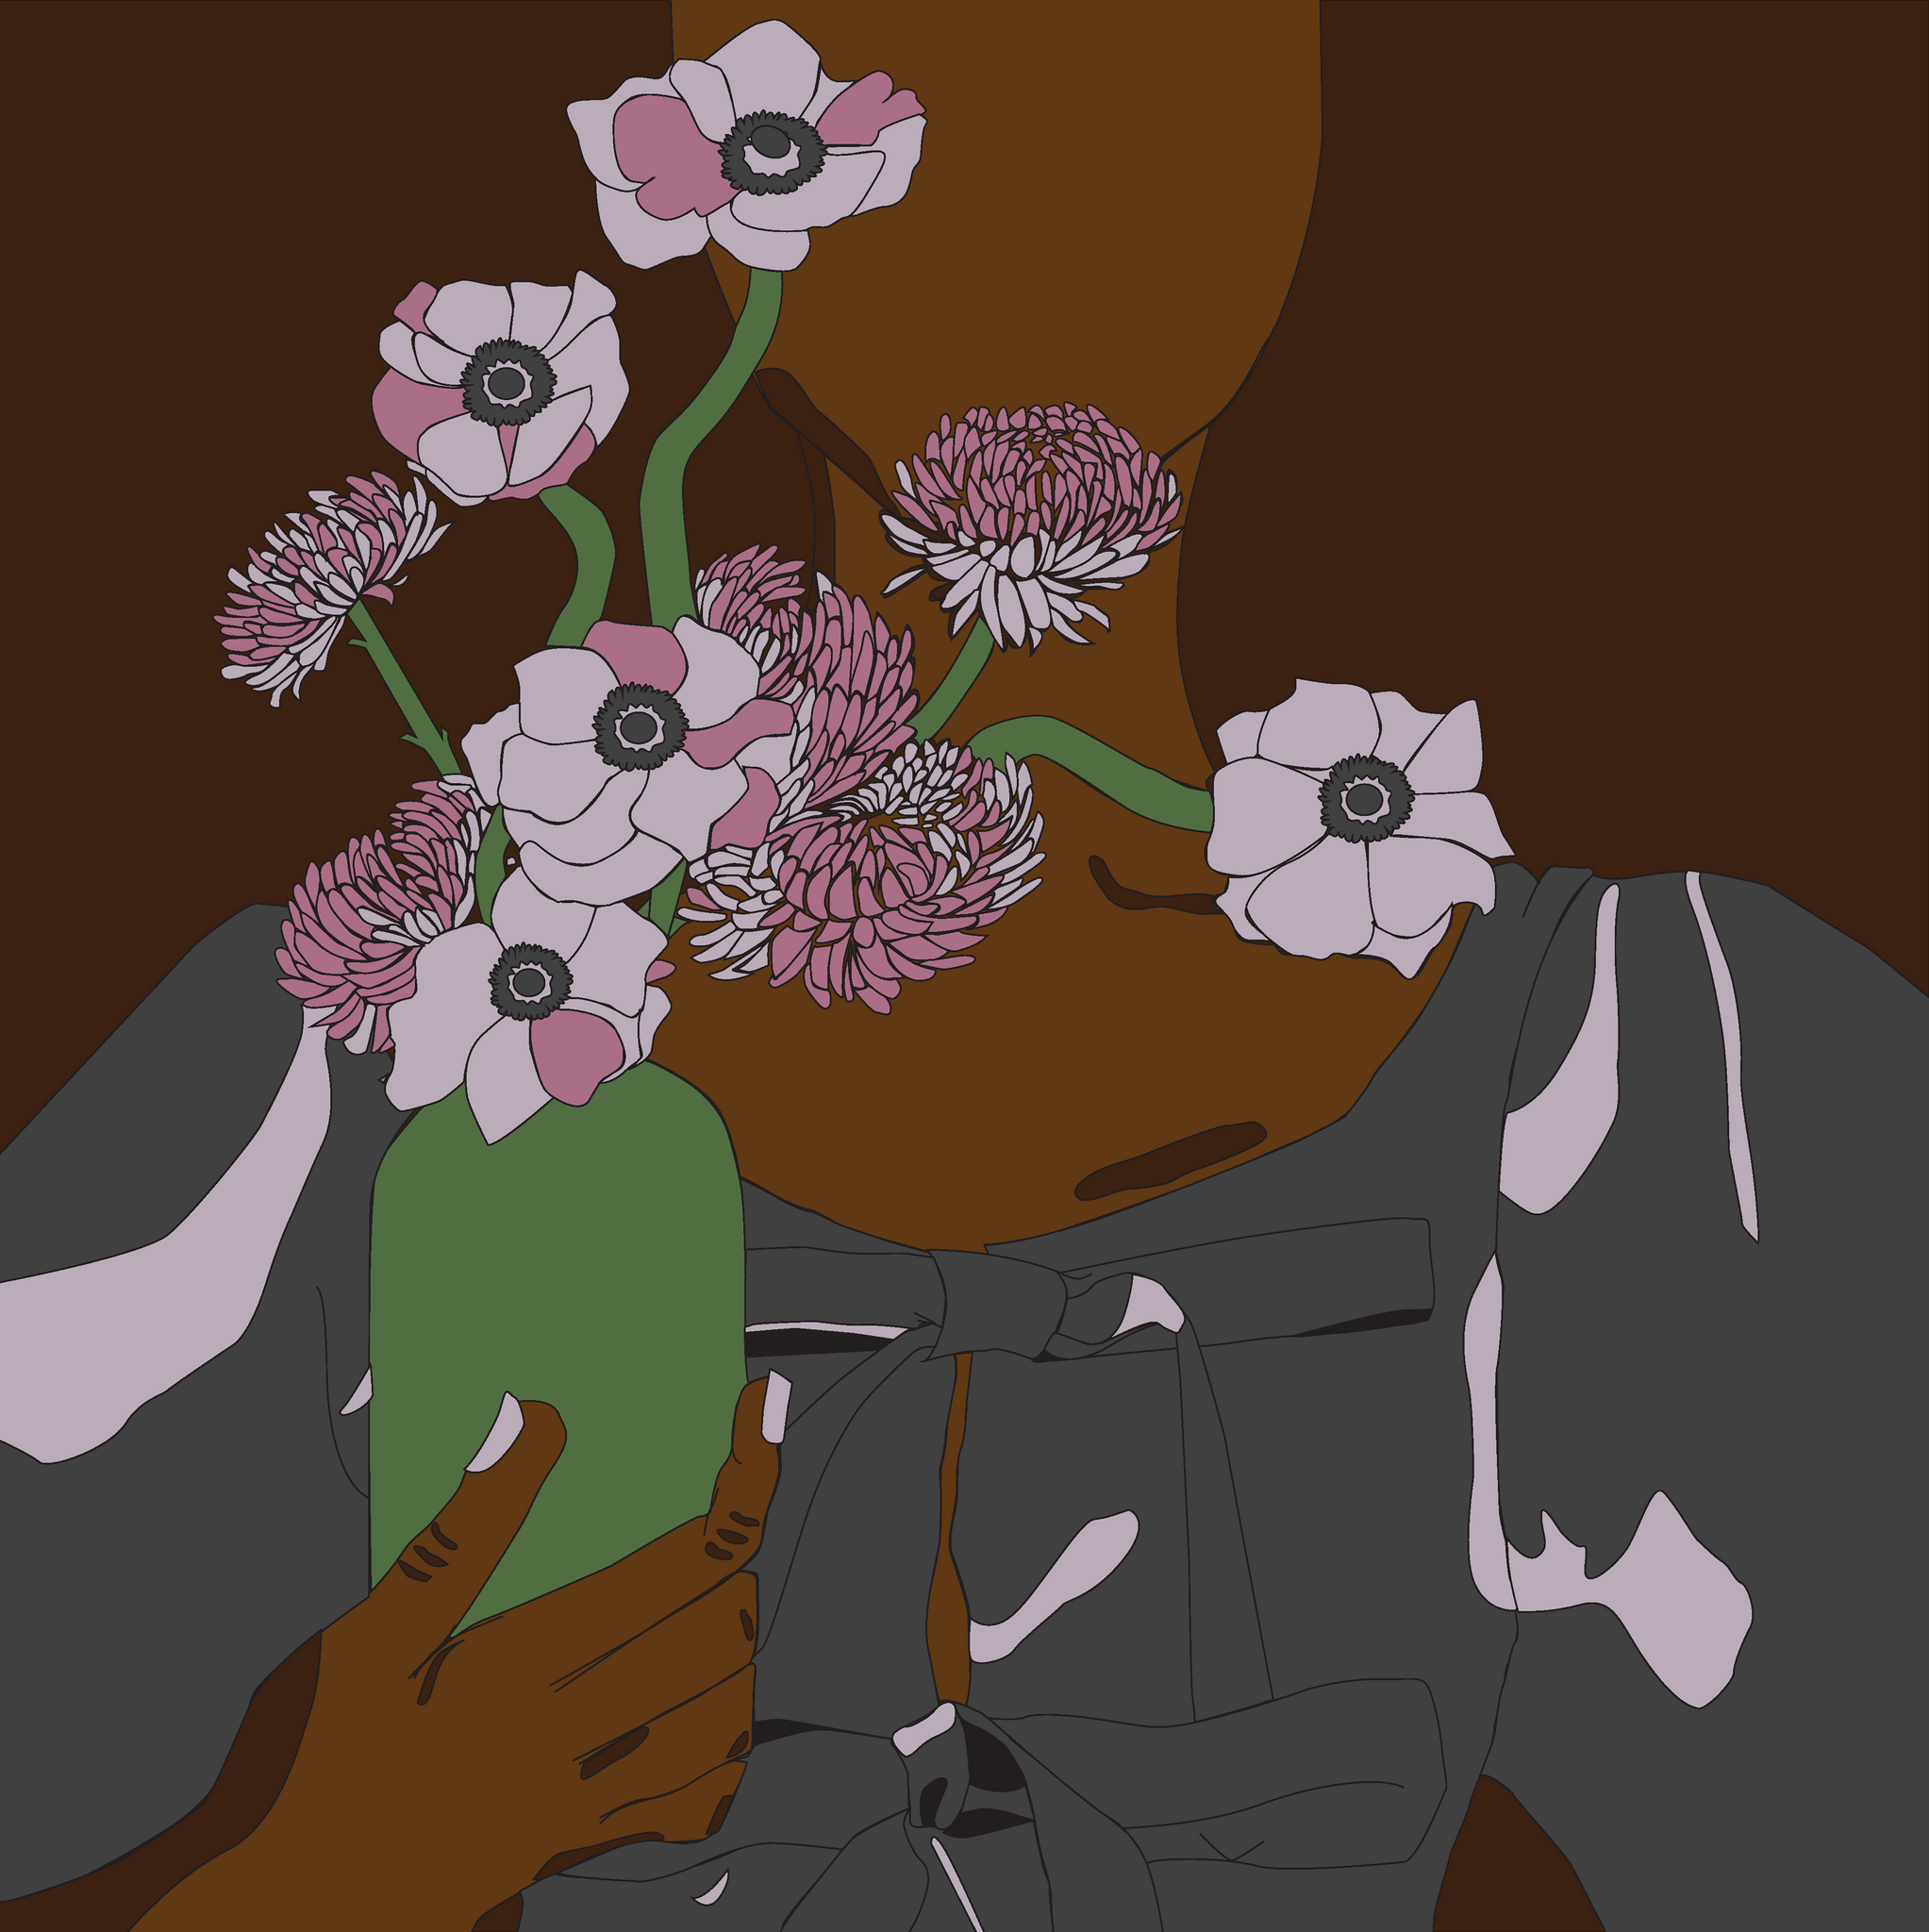 A graphic illustration of a Black woman in a black top holding a green vase of pink flowers, with a brown background